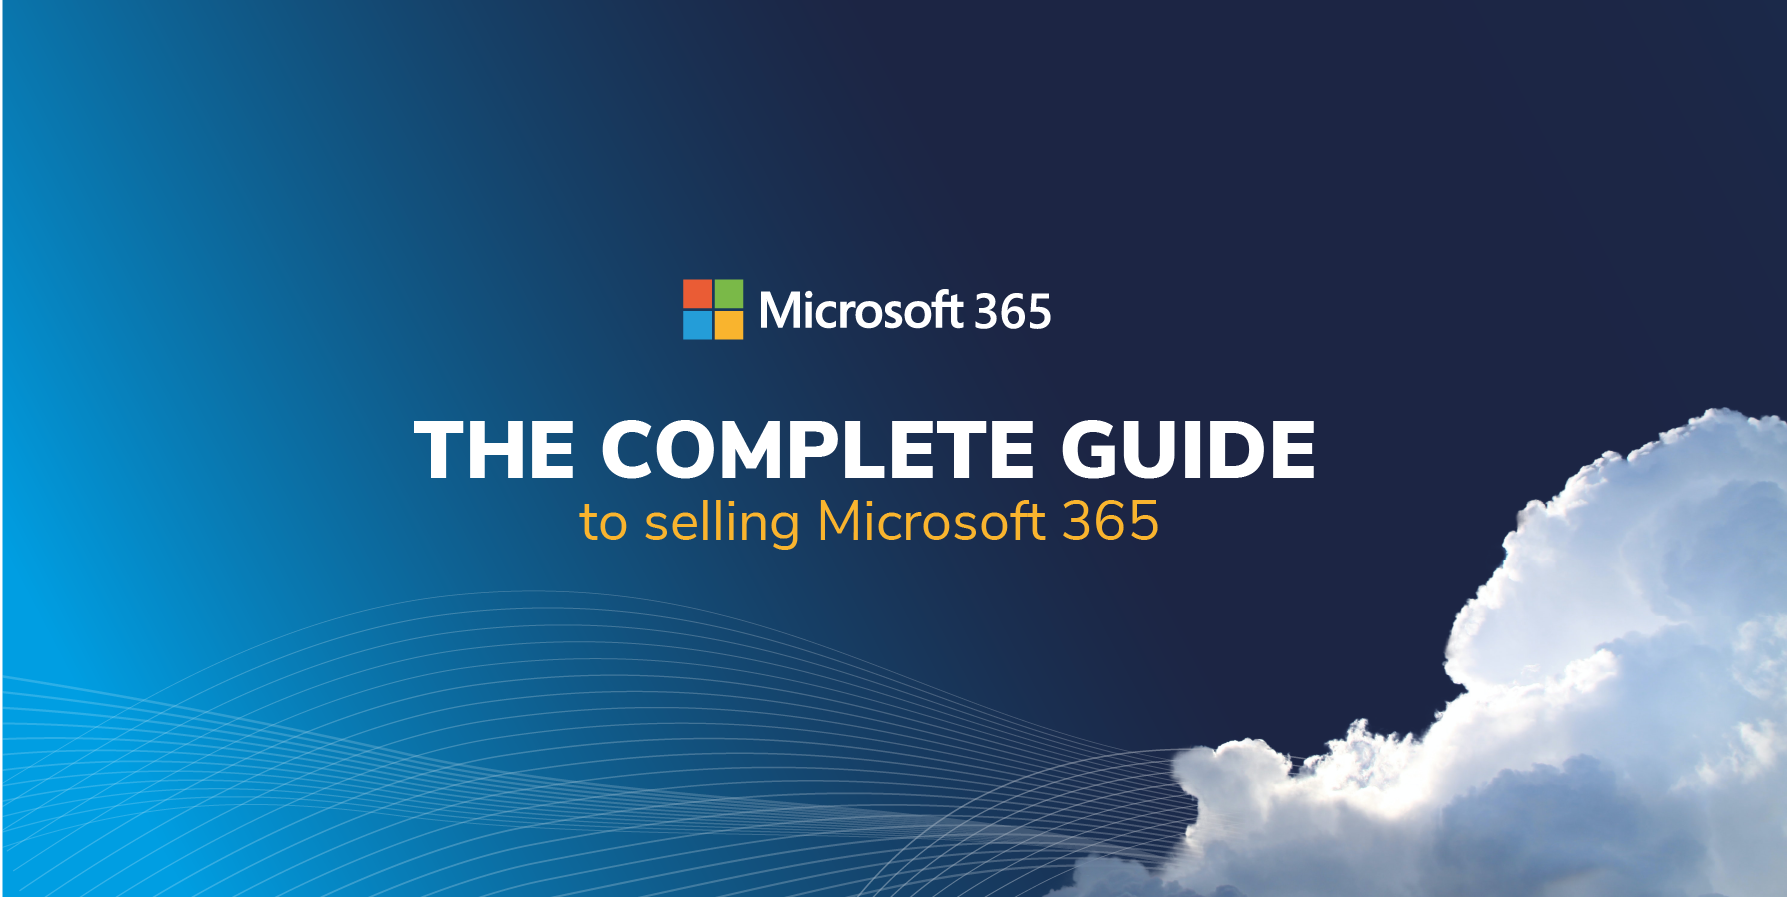 The Complete Guide to Selling M365